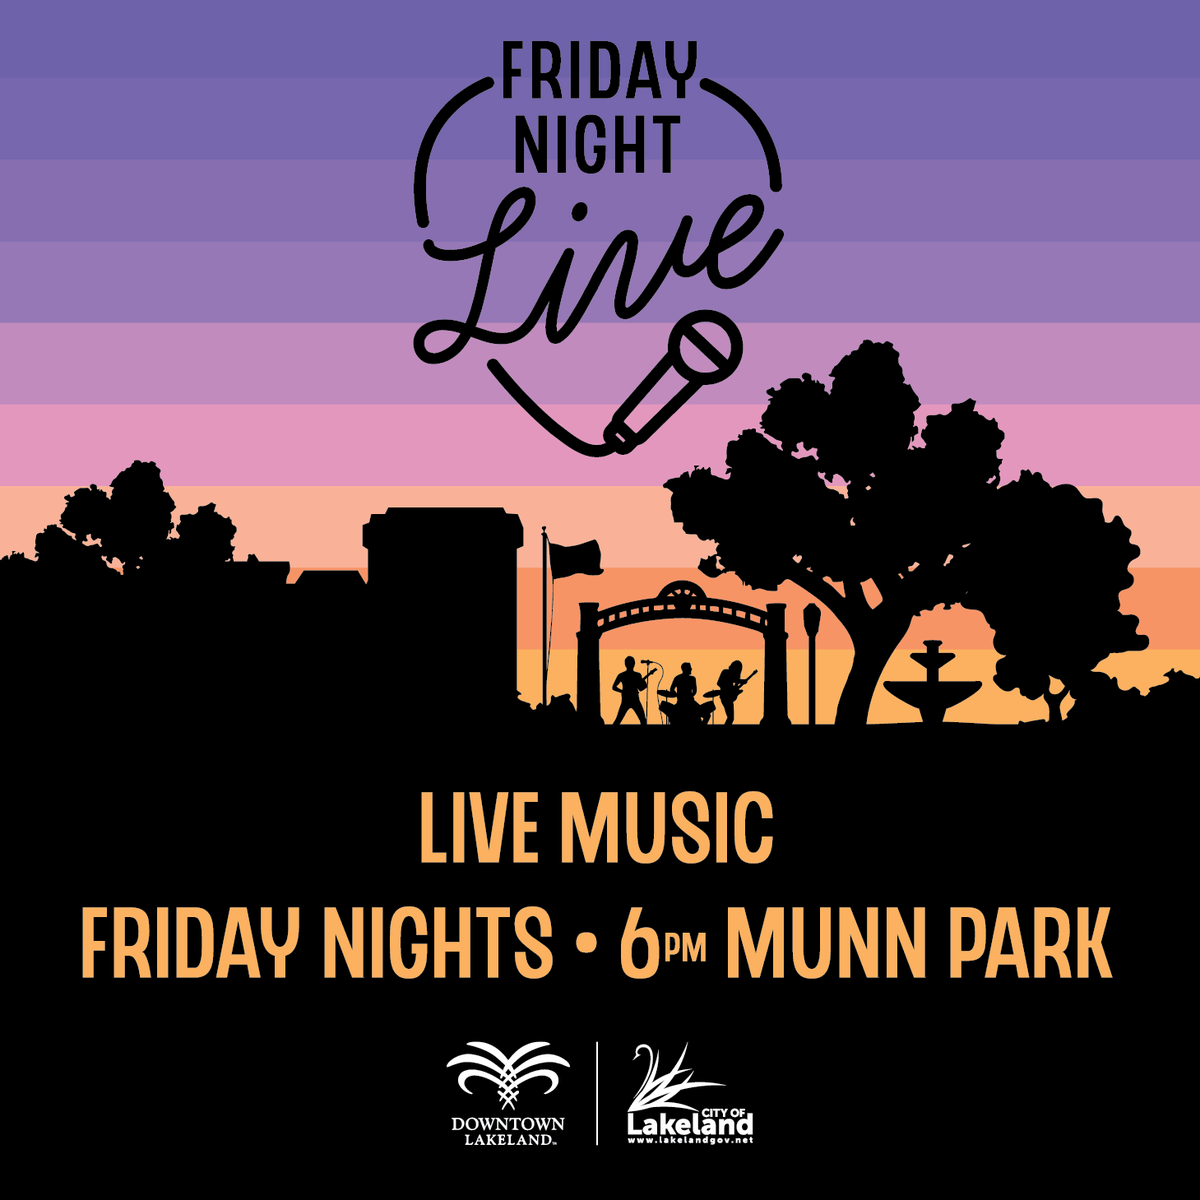 Friday Night Live is tonight with Proper Wednesday in Munn Park, beginning at 6pm. Don't miss it! LDDA.ORG/NEWS